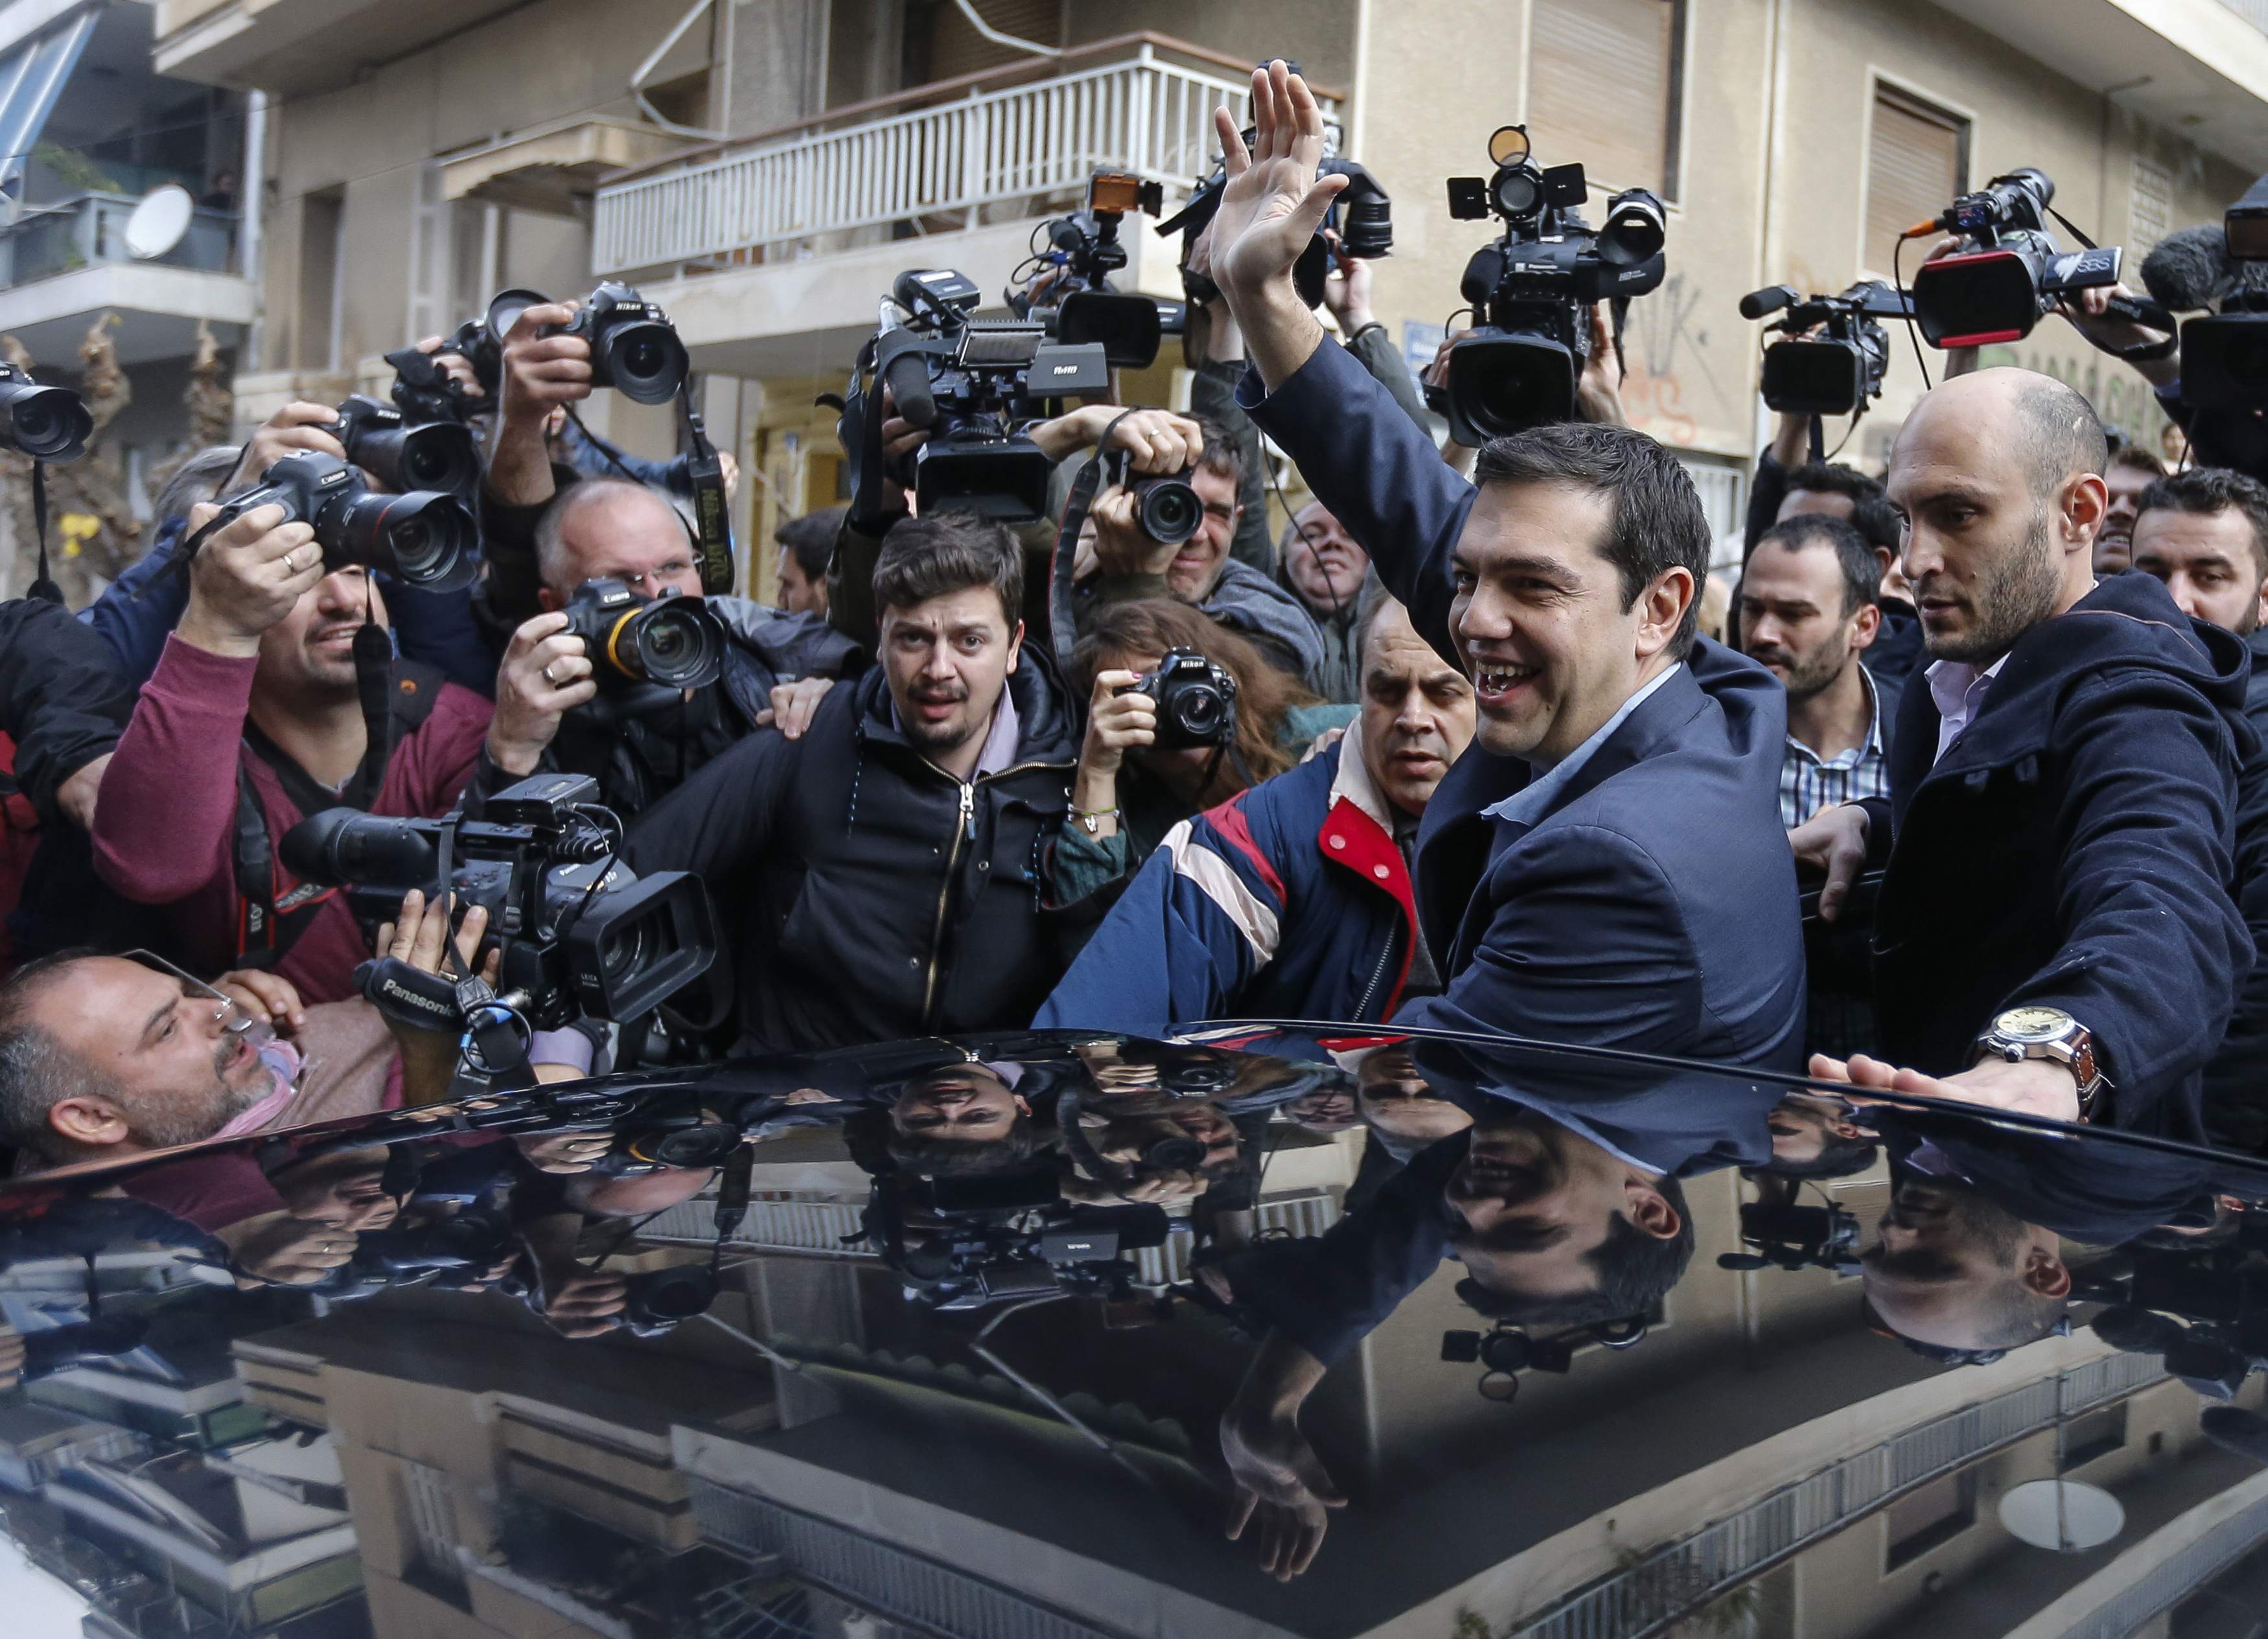 Greece's new Prime Minister Alexis Tsipras of Syriza waves as he leaves a polling station in Athens Jan. 25, 2015.